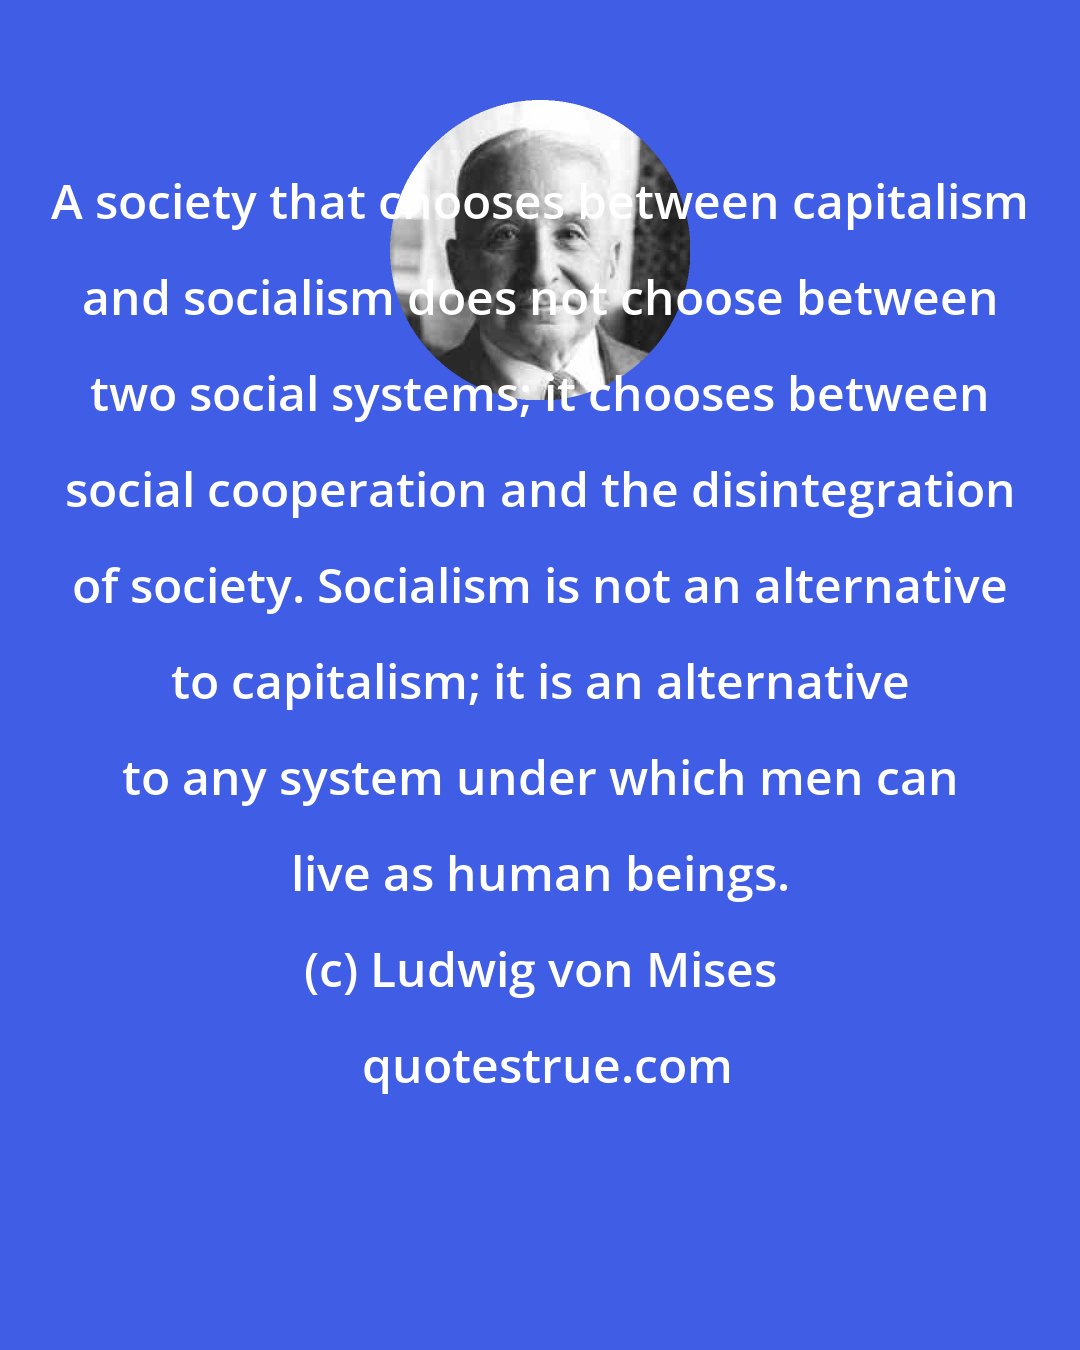 Ludwig von Mises: A society that chooses between capitalism and socialism does not choose between two social systems; it chooses between social cooperation and the disintegration of society. Socialism is not an alternative to capitalism; it is an alternative to any system under which men can live as human beings.